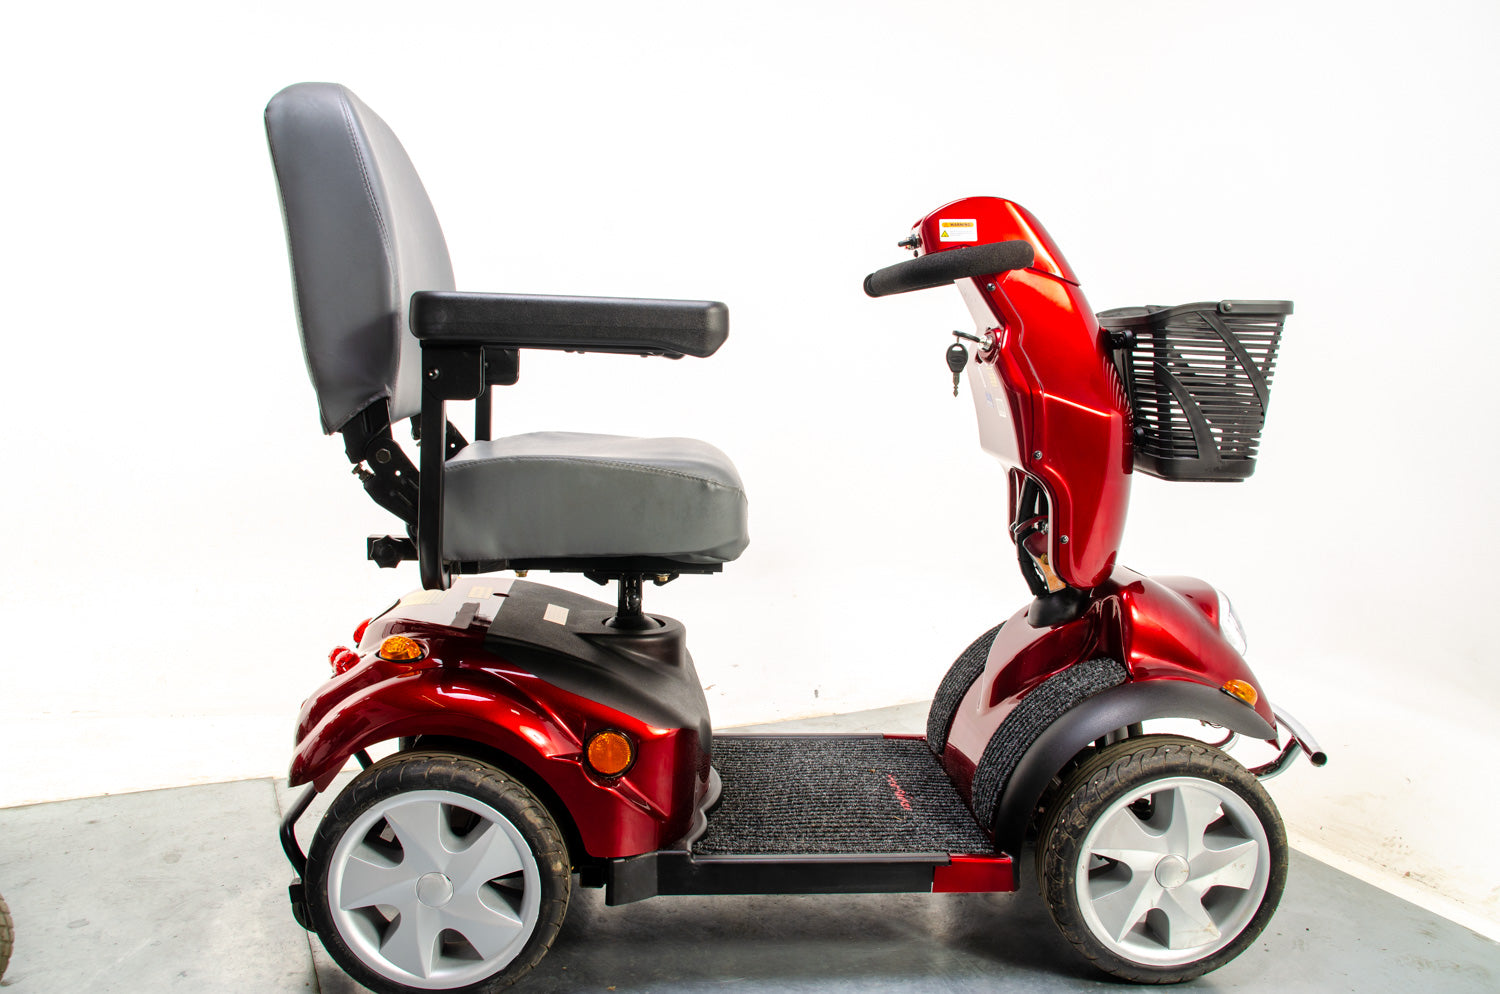 2018 Land Ranger S HD 35 Stone Bariatric Road Scooter 8mph Large All-Terrain Off-Road Mobility Red